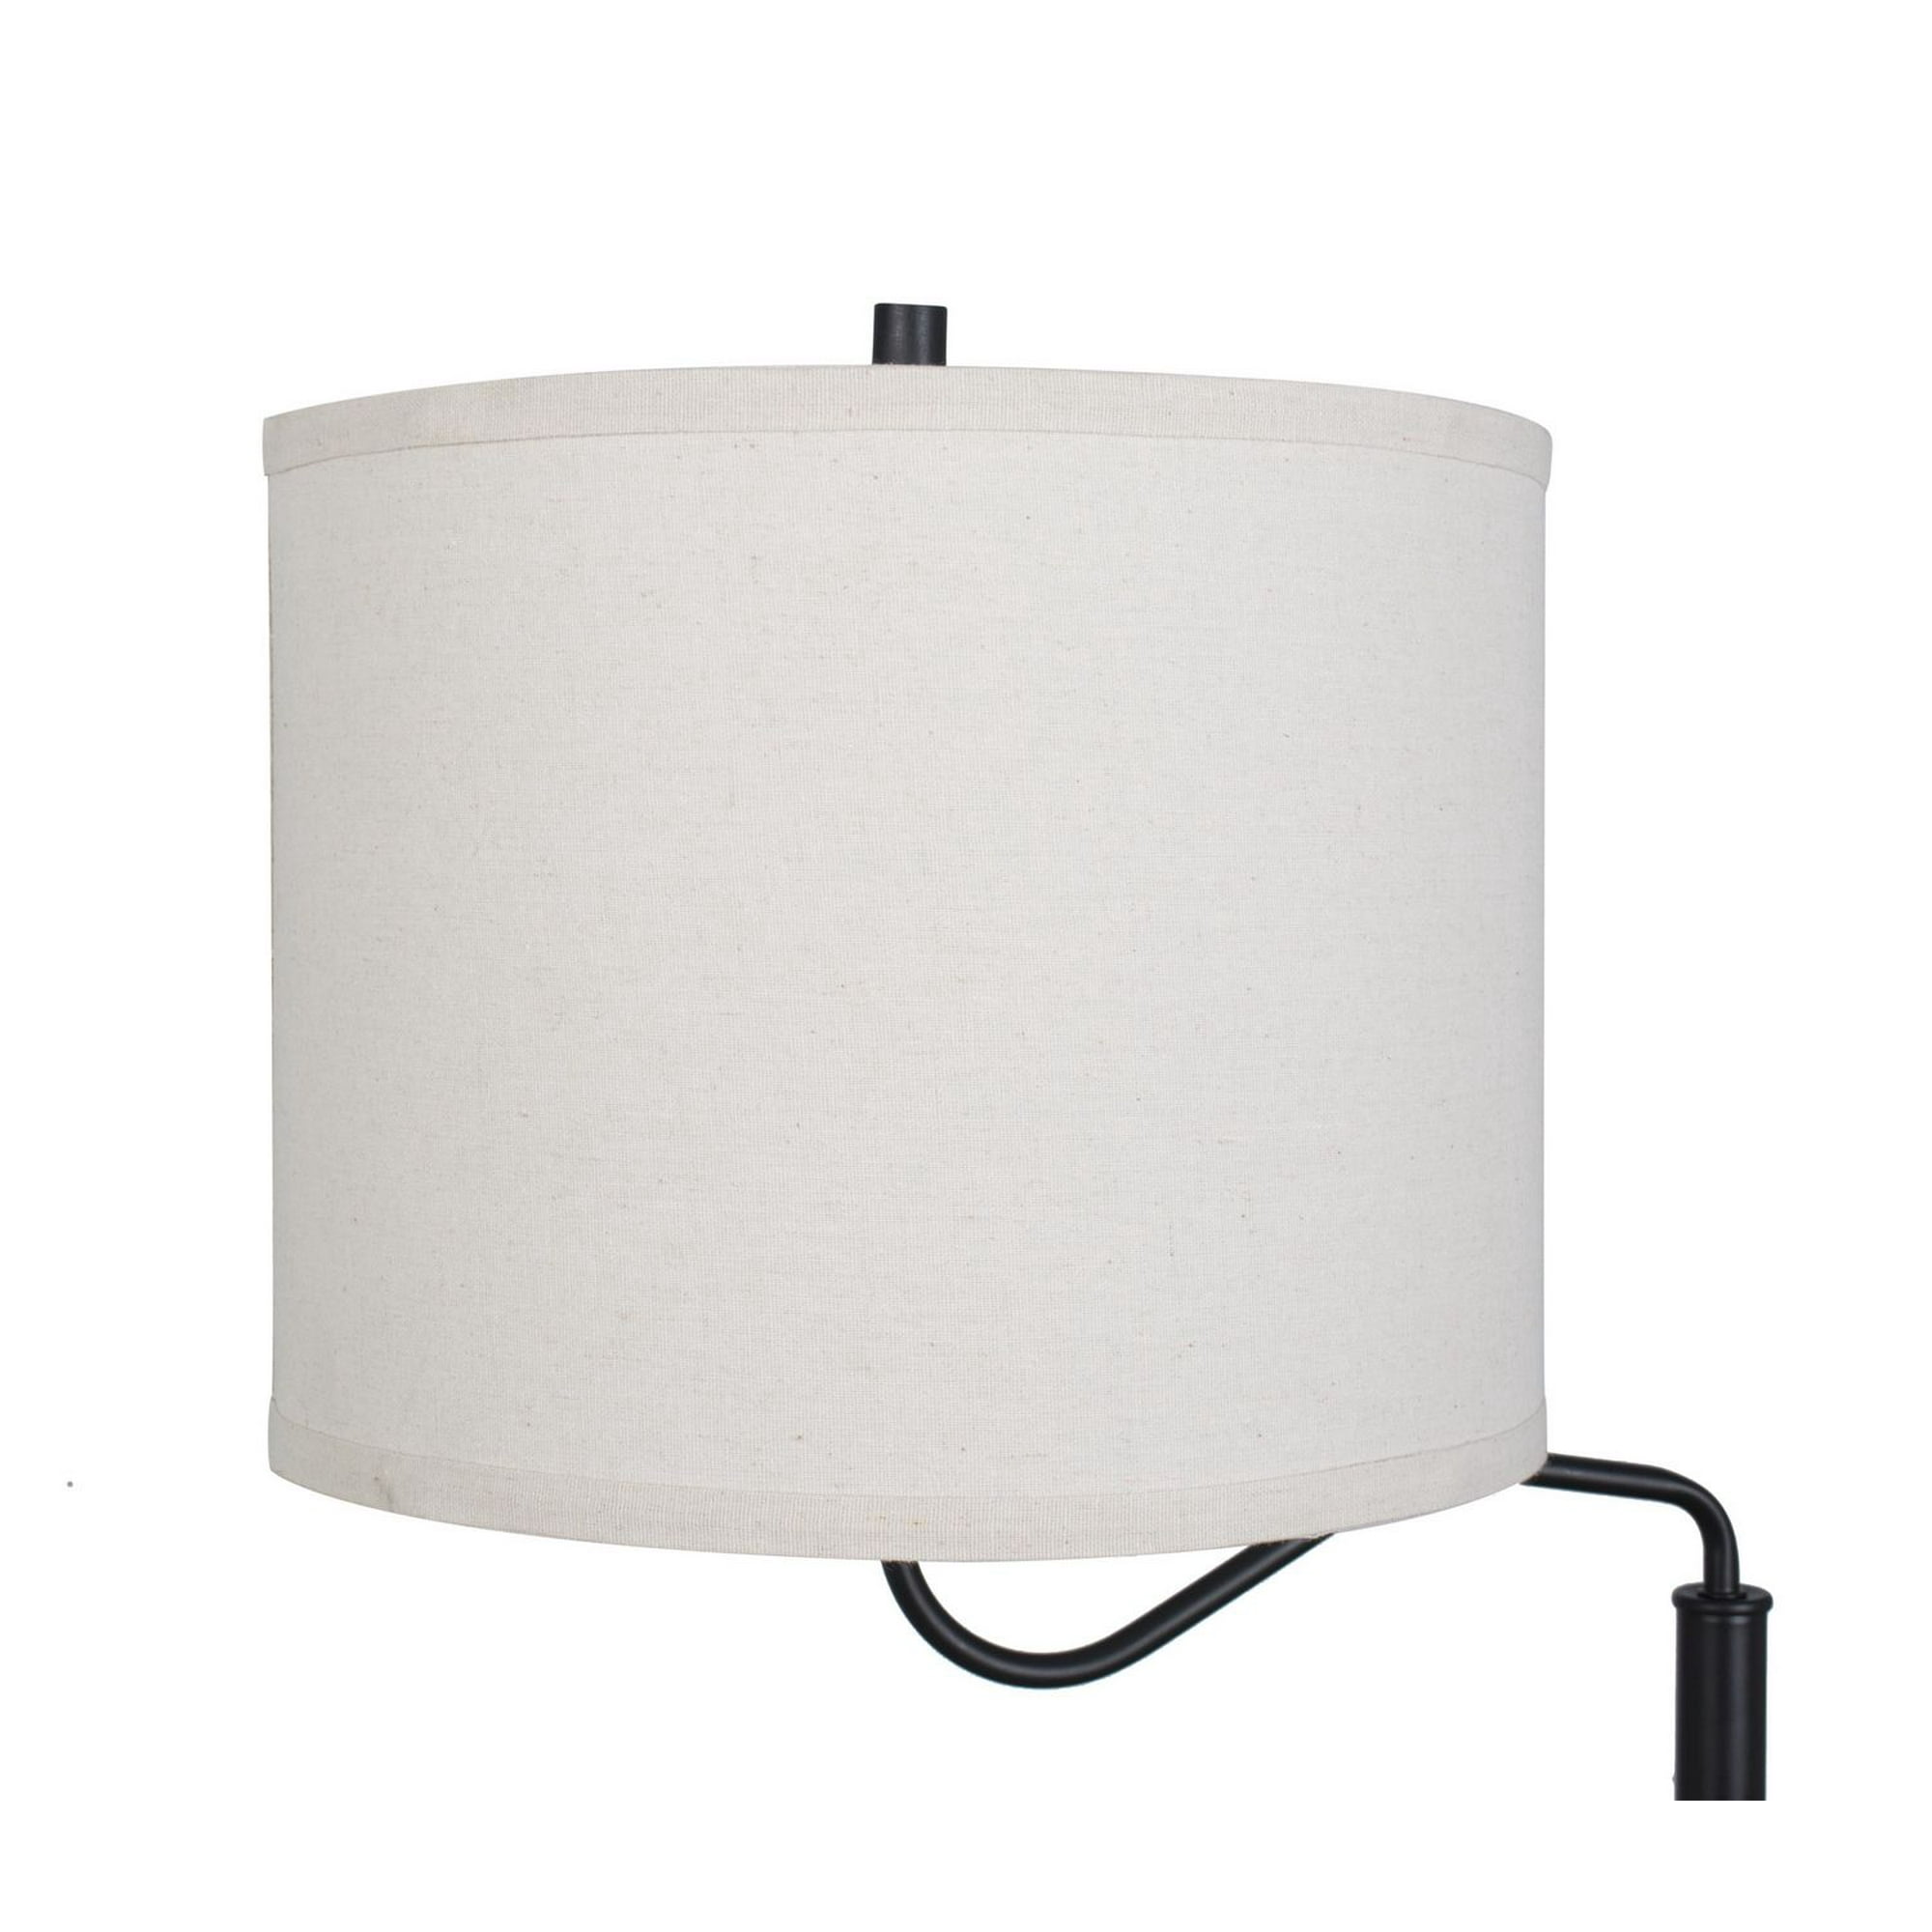 Hometrends End Table Floor Lamp with USB Port, Metal & MDF Base